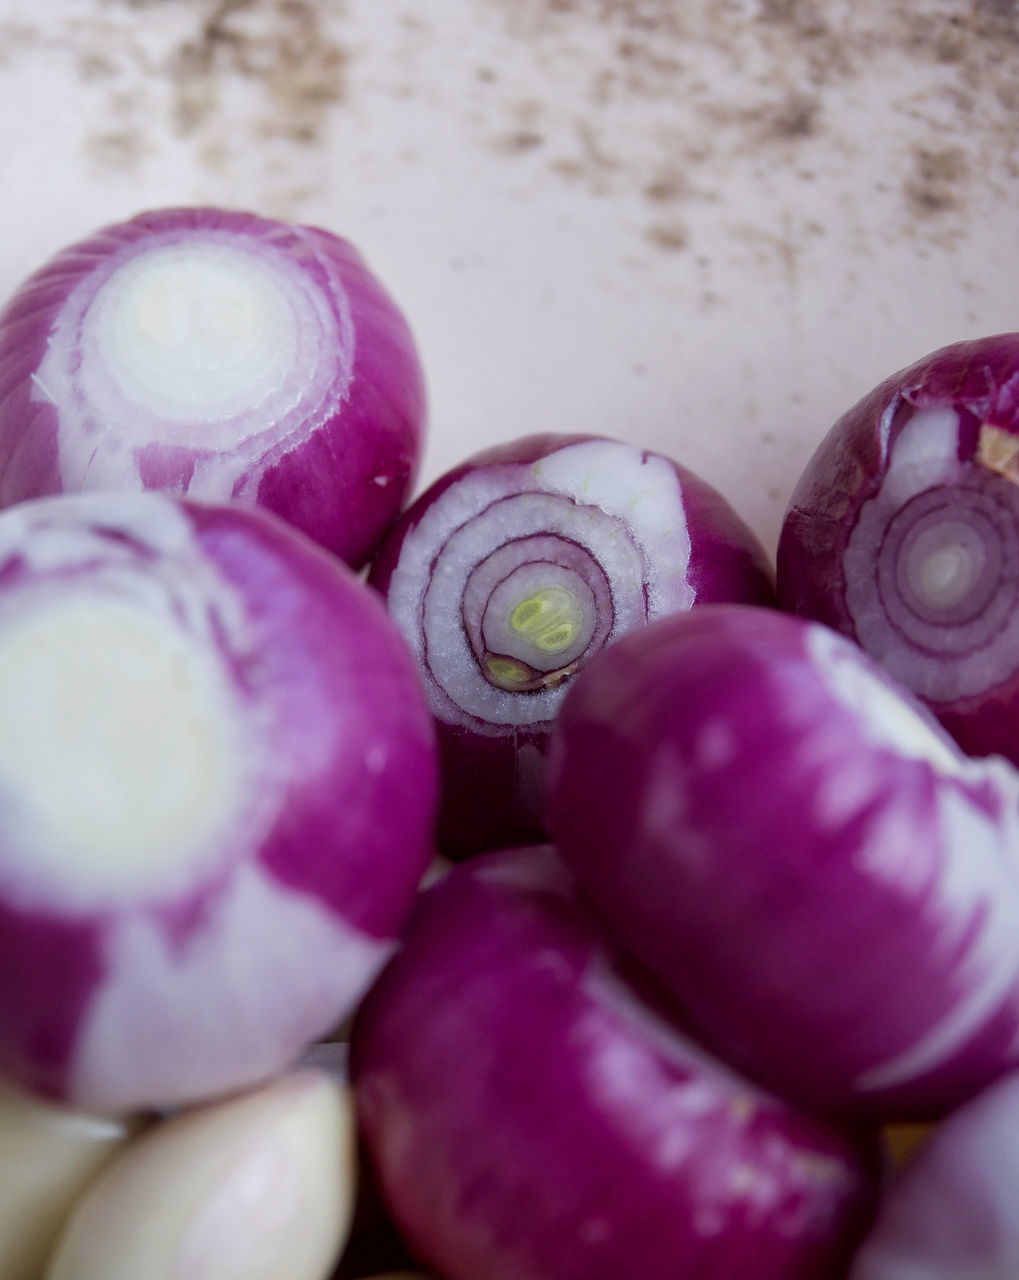 red onion, food and drink, food, onion, purple, freshness, vegetable, healthy eating, pink, wellbeing, produce, spanish onion, no people, close-up, petal, raw food, flower, still life, indoors, selective focus, organic, large group of objects